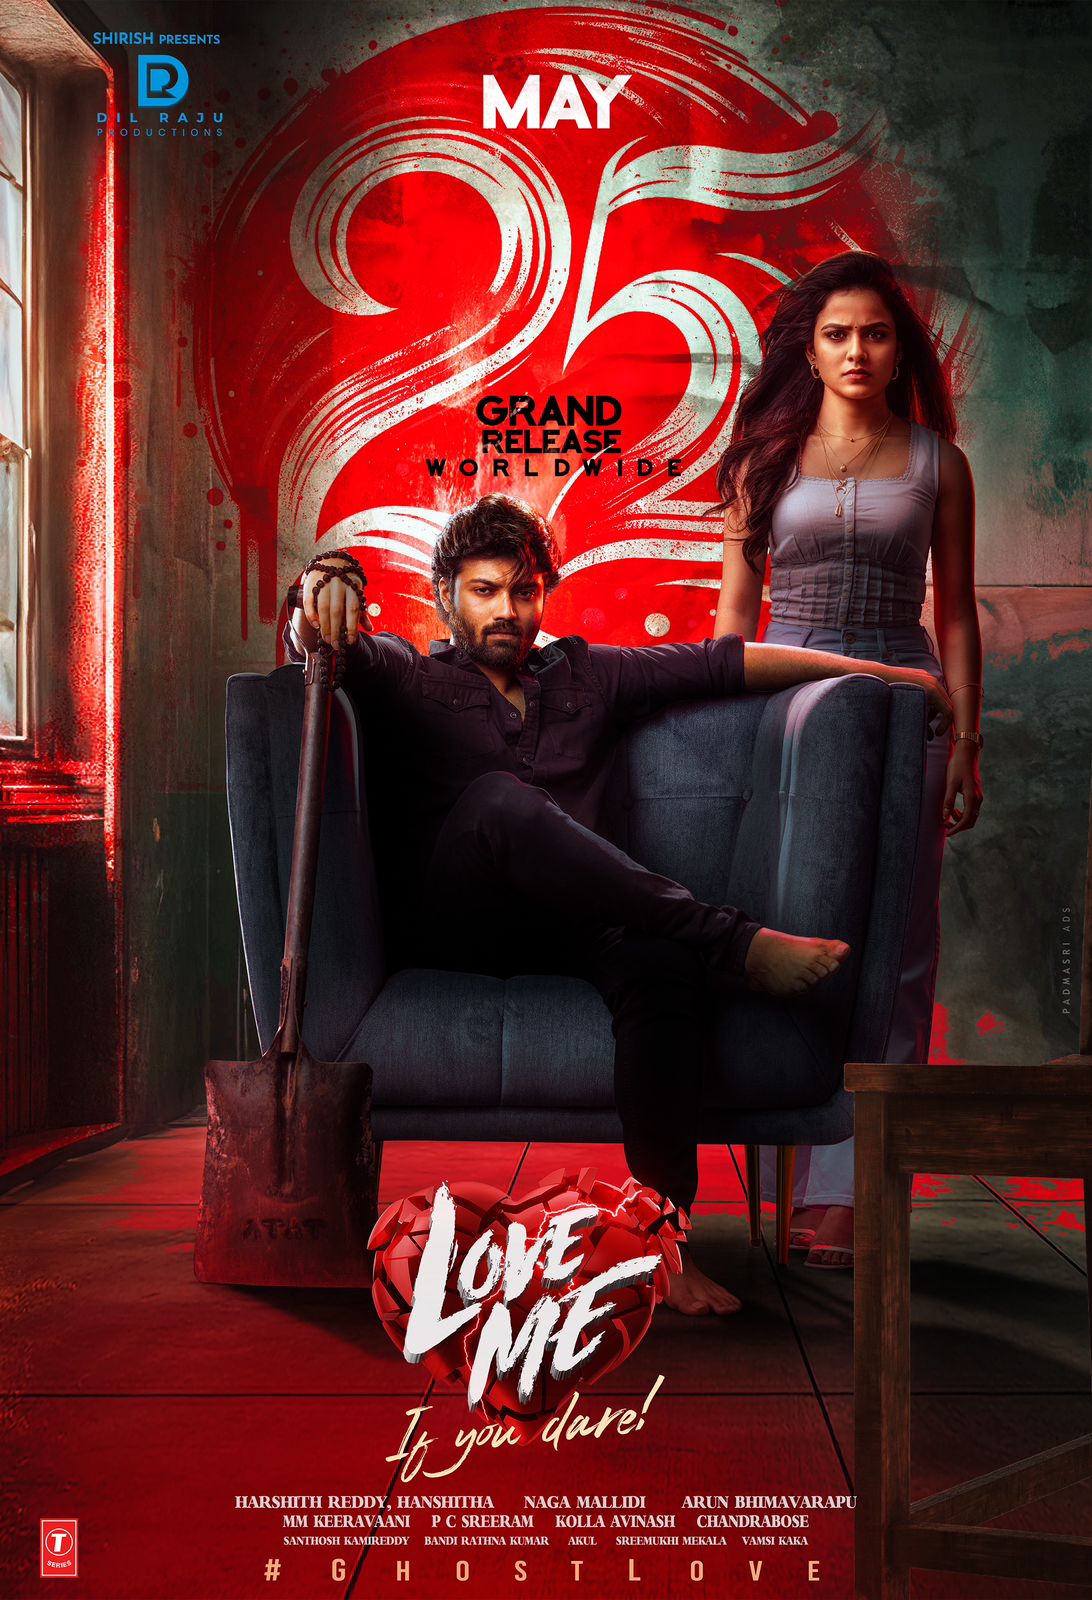 Love Me Movie Set for Grand Release on May 25